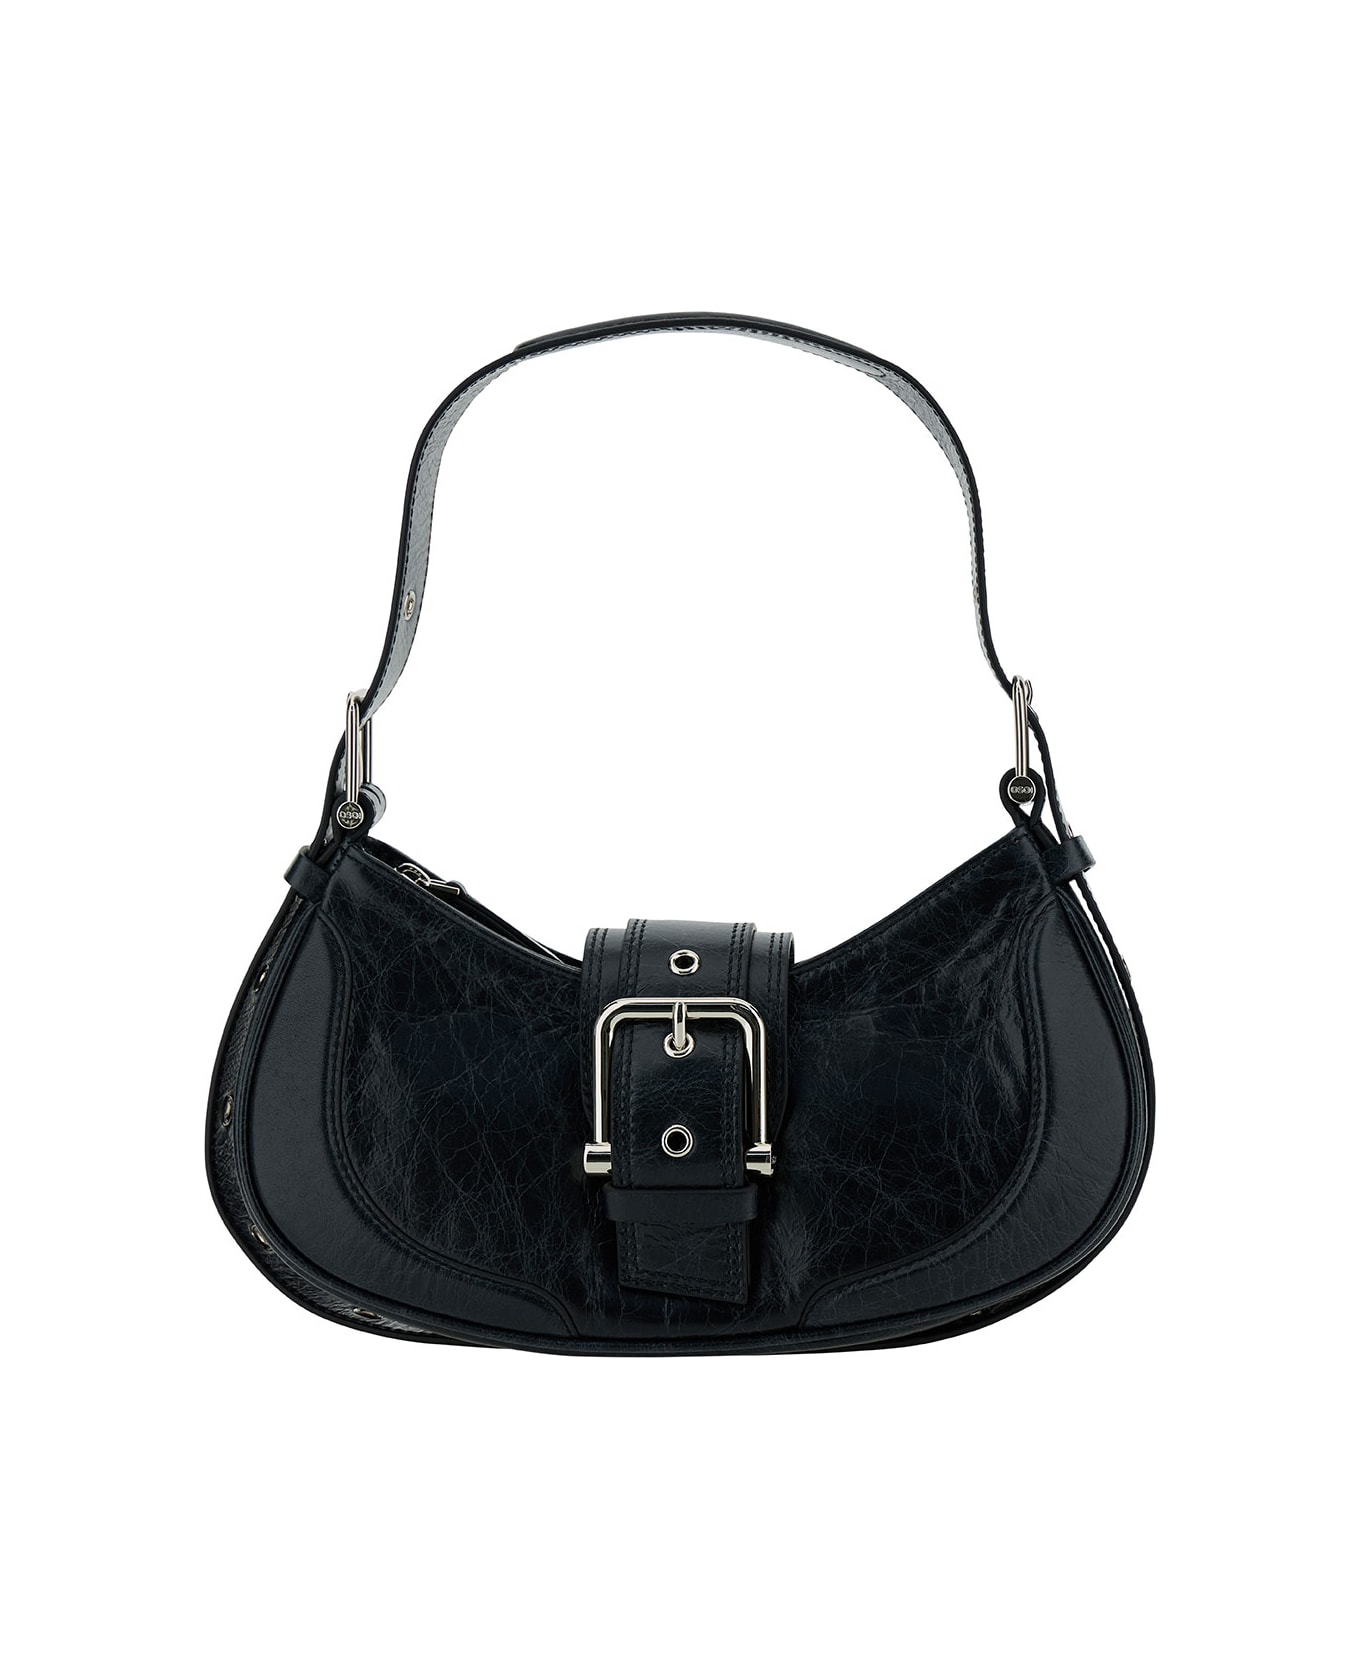 OSOI 'small Brocle' Black Shoulder Bag In Hammered Leather Woman - Black トートバッグ